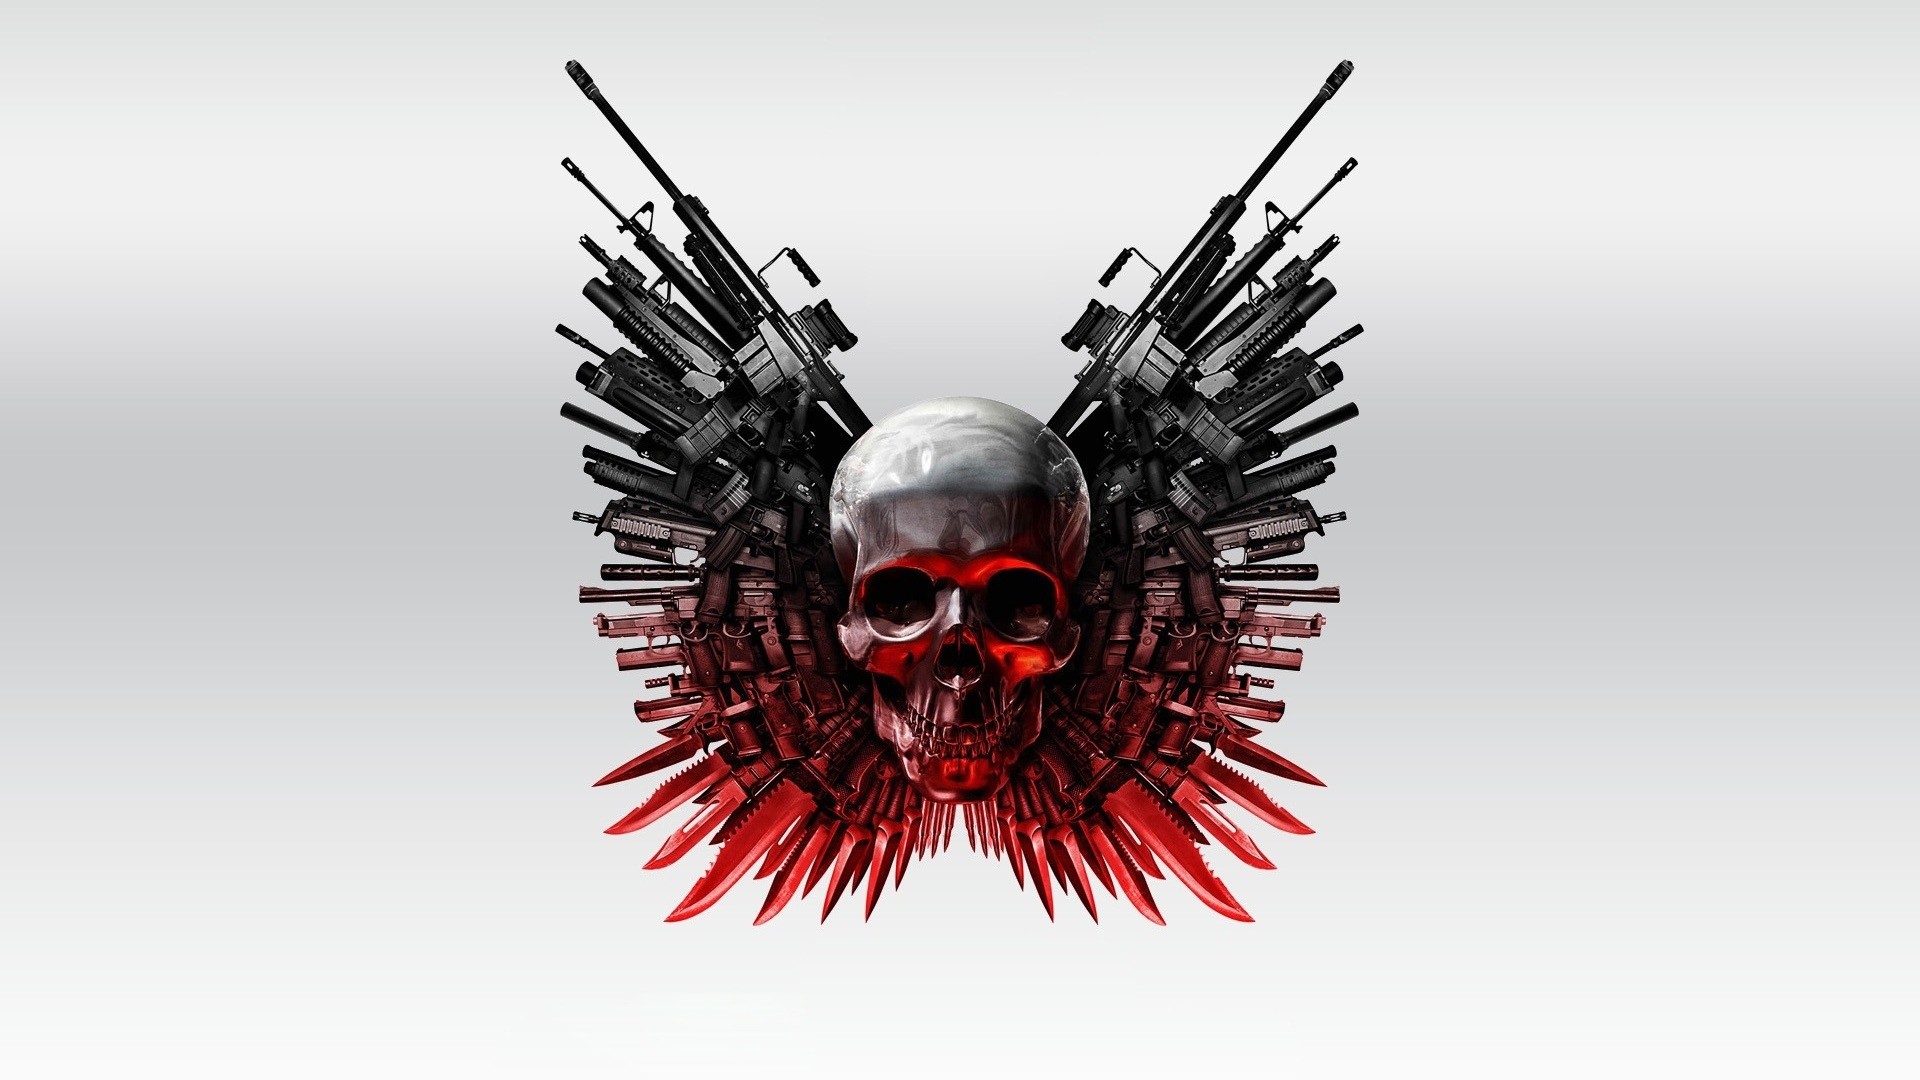 1920x1080 Wallpapers, Weapons and skull Backgrounds, Weapons and skull Free HD .